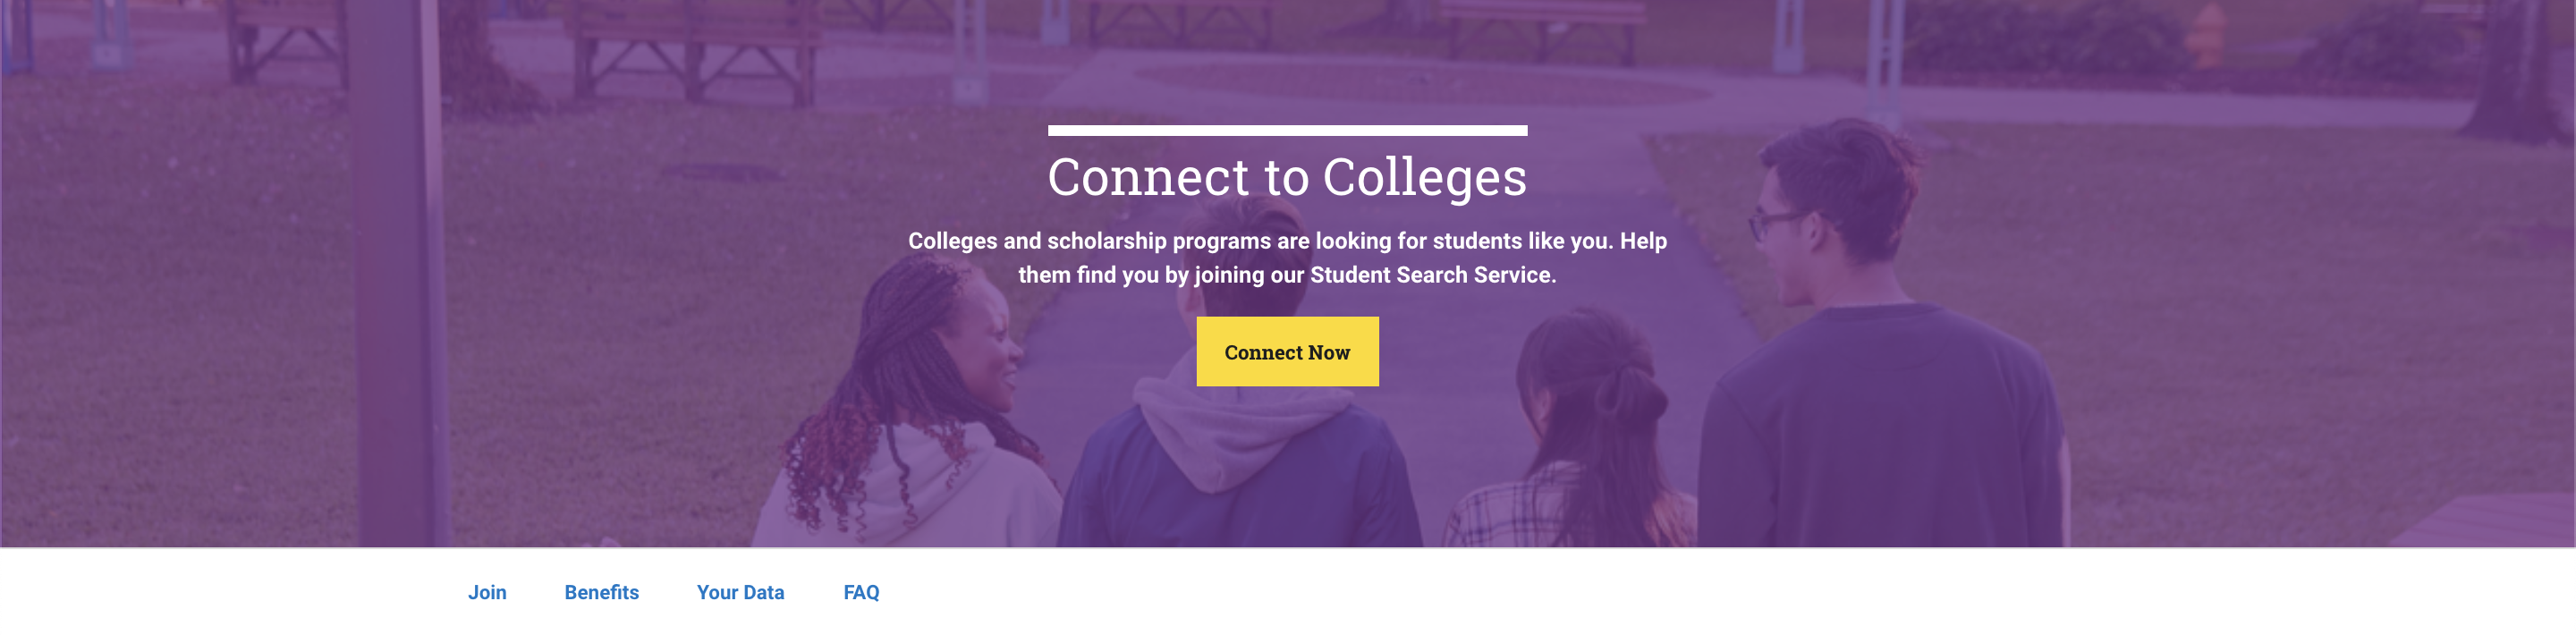 Connect to Colleges banner